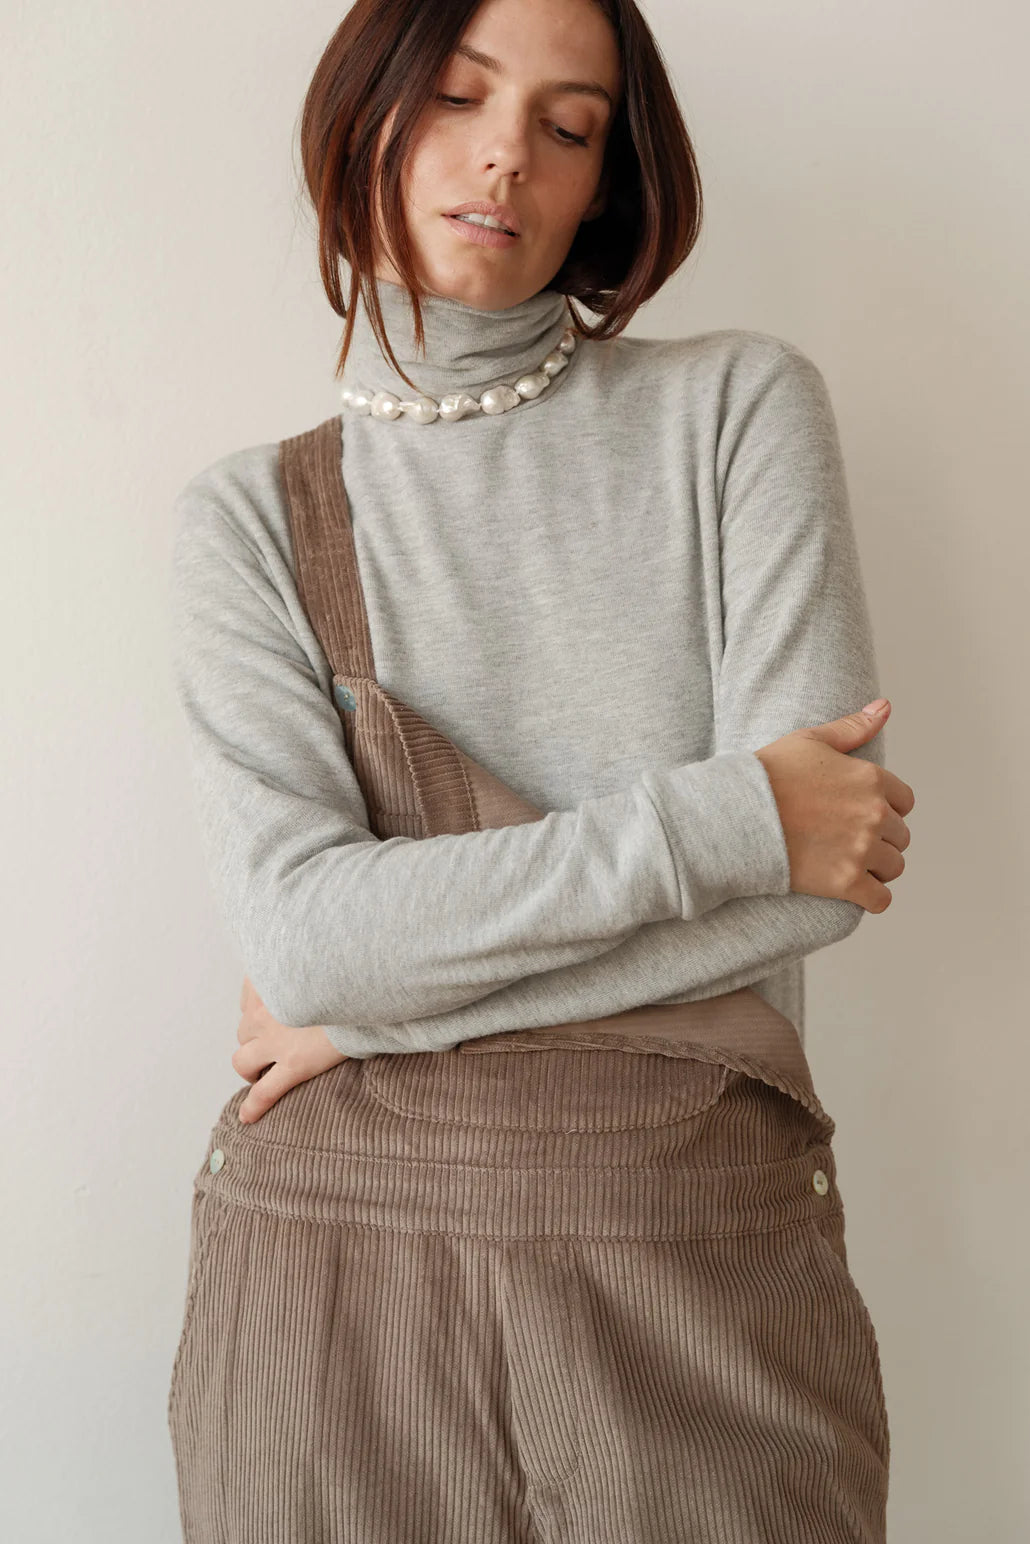 A close up image of a model posing and wearing the sweater turtleneck in heather grey styled under corduroy overalls and a pearl necklace